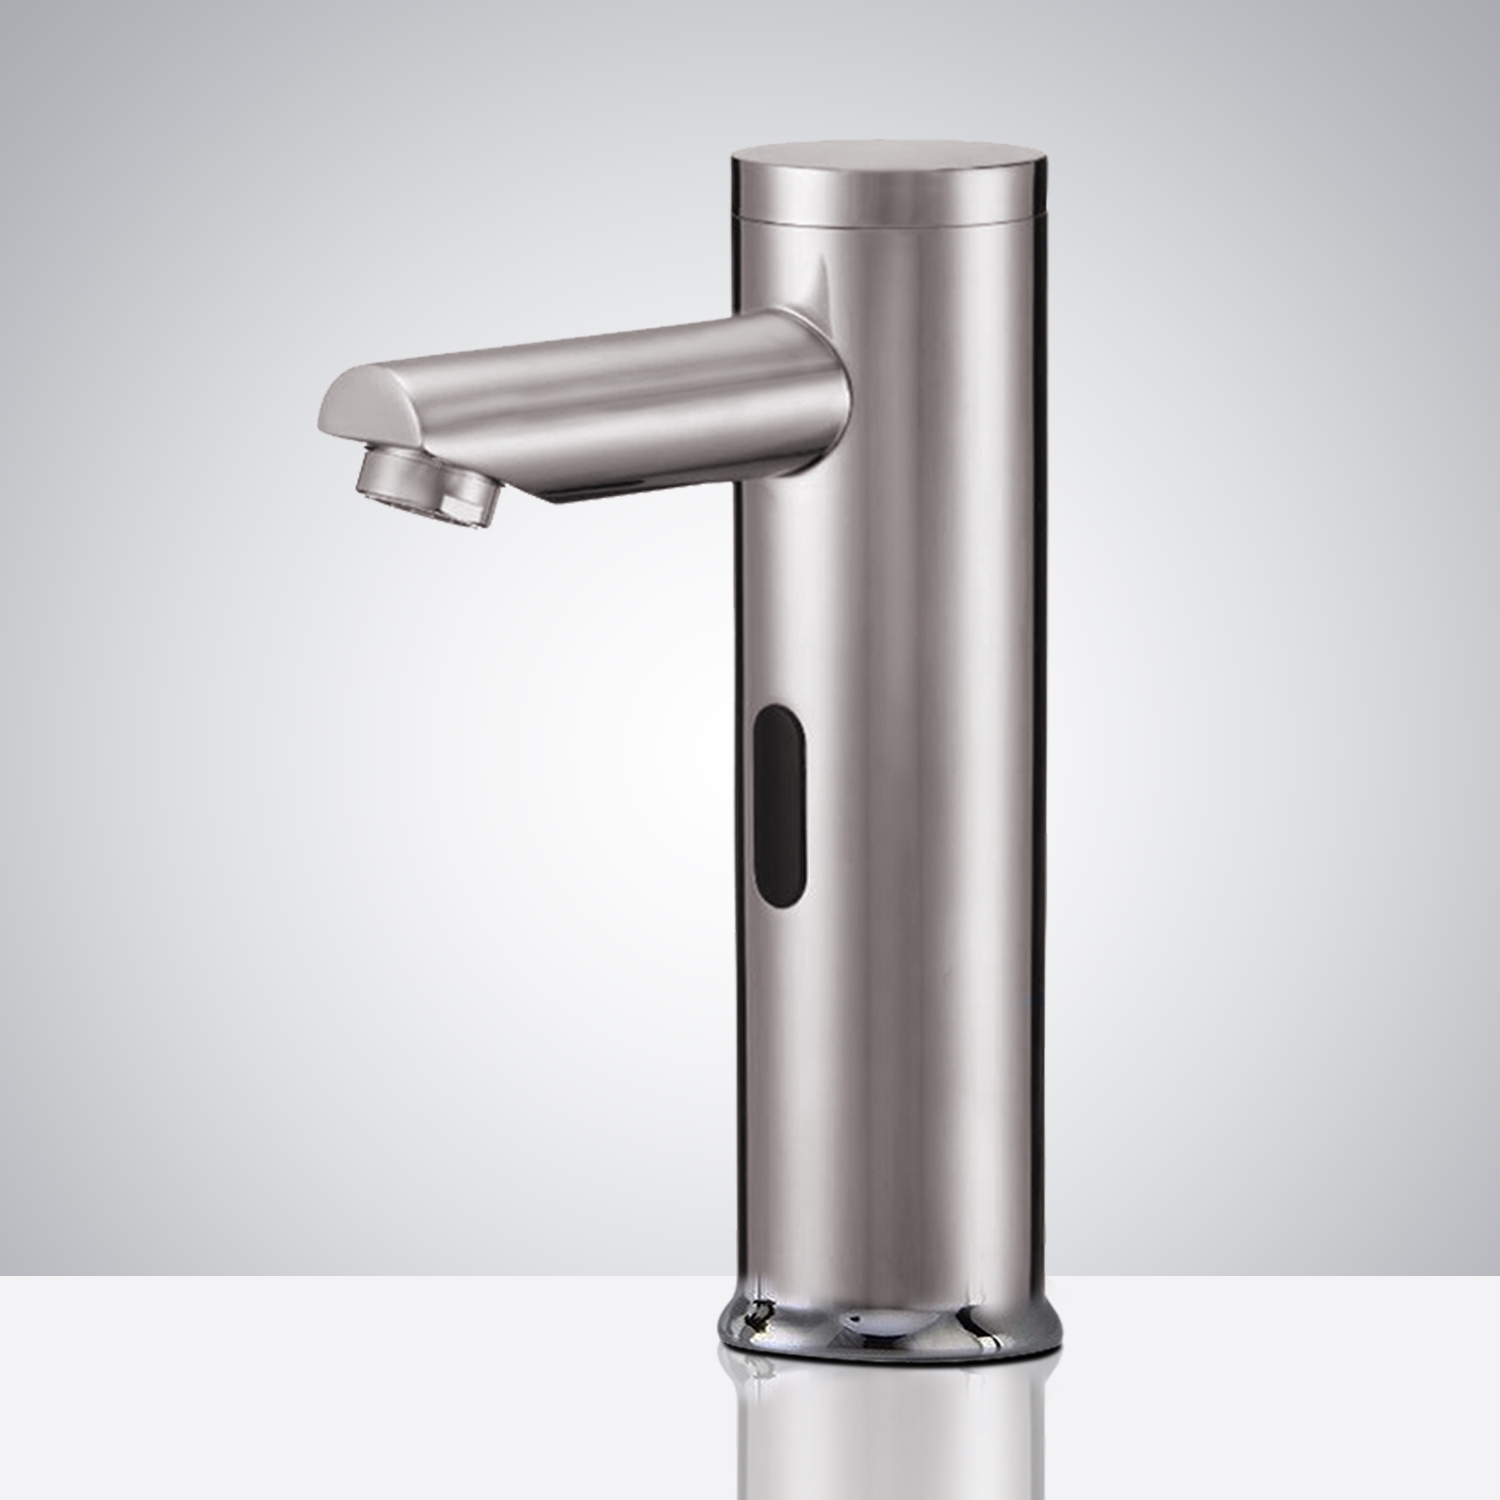 Commercial Brushed Nickel Touchless Volume Automatic Sensor Hands Free Faucet Installation